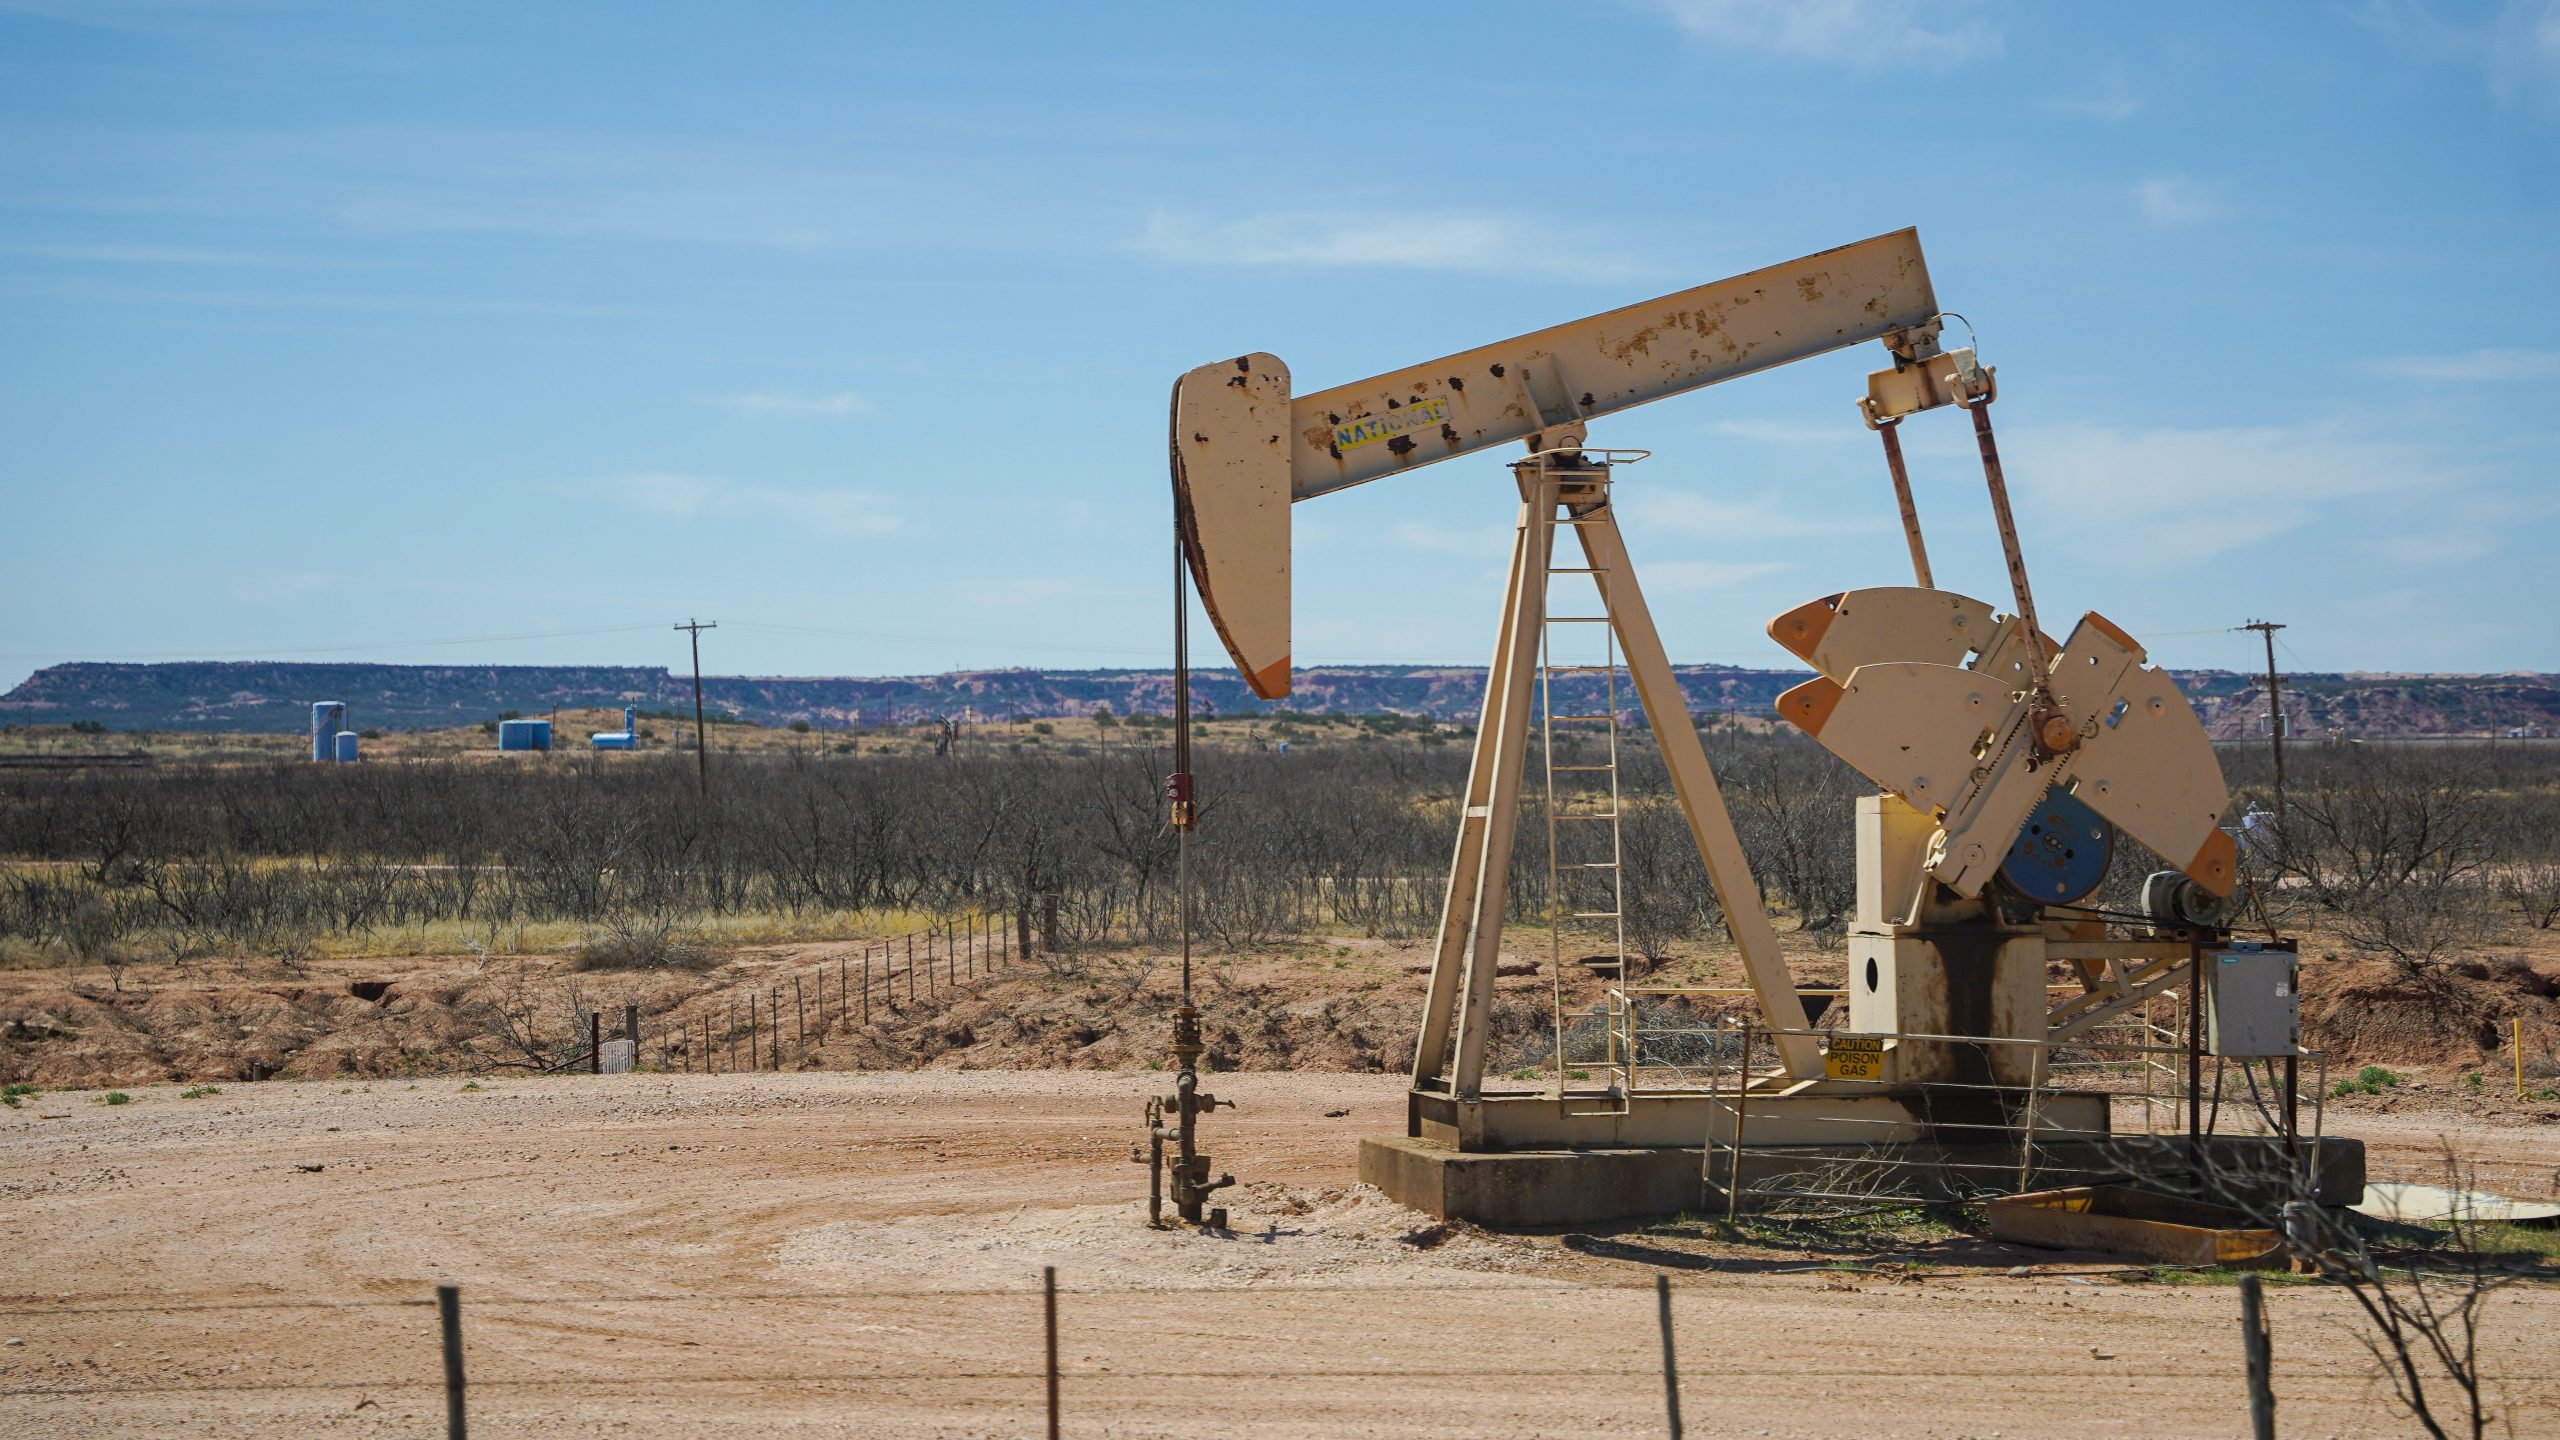 A Pumpjack Extracting Oil out of an Oil Well